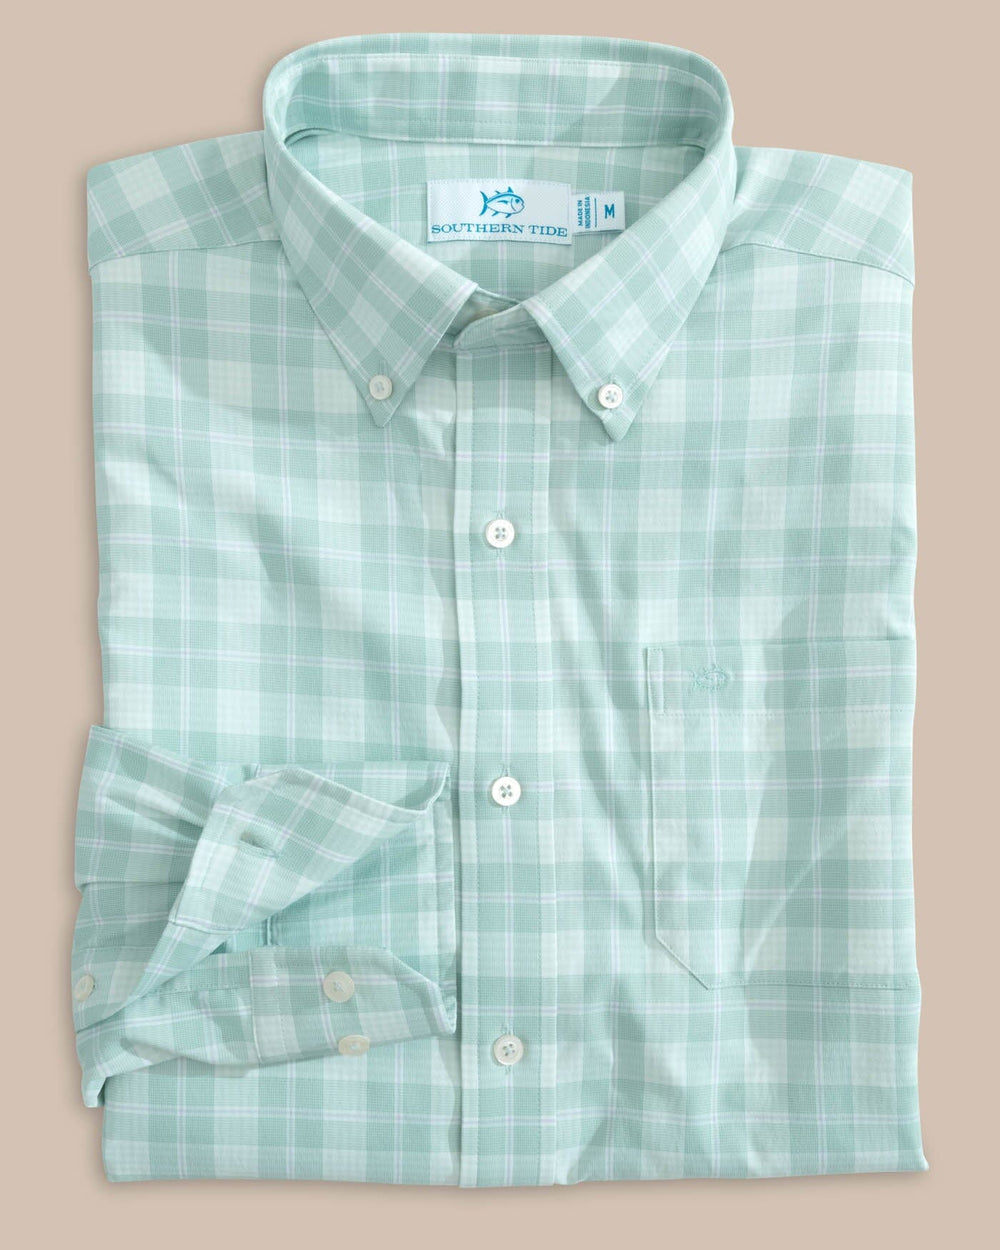 The front view of the Southern Tide Intercoastal Primrose Plaid Long Sleeve Sport Shirt by Southern Tide - Morning Mist Sage